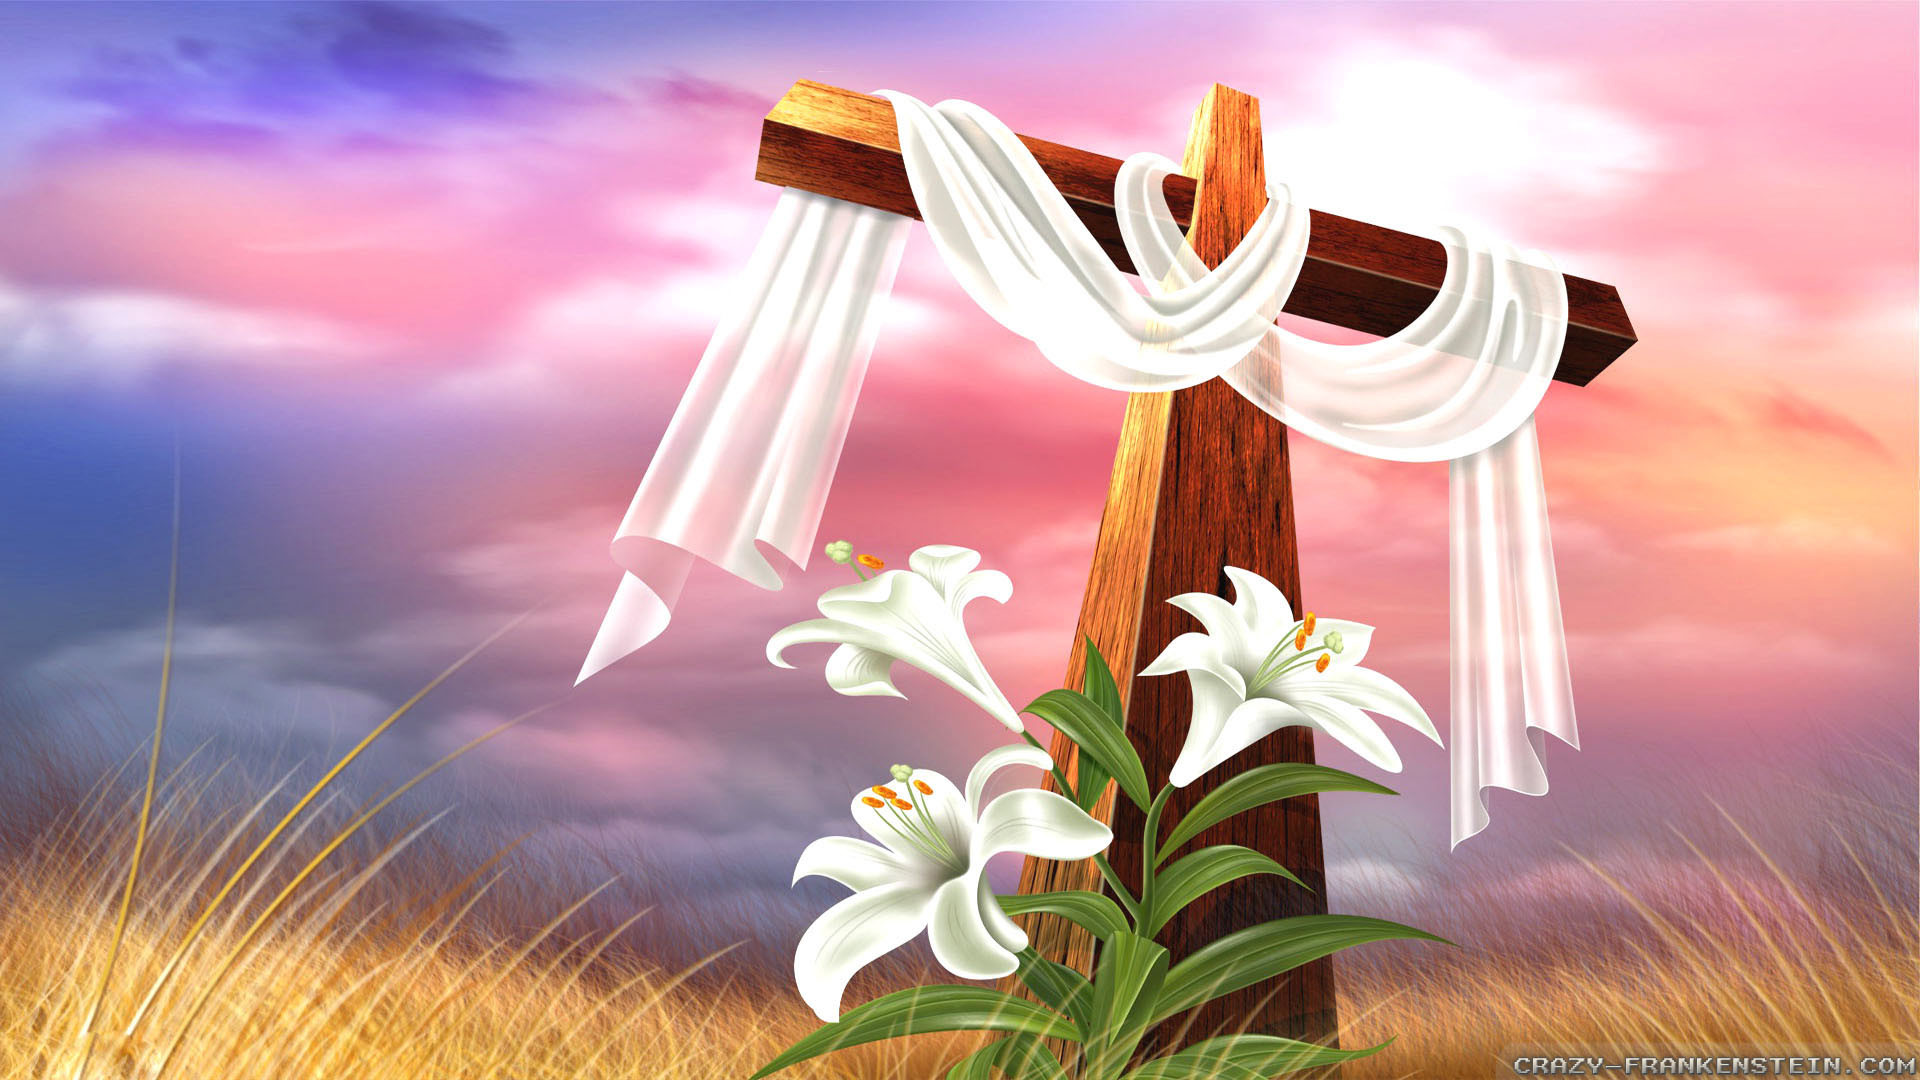 231100 Easter Religious Stock Photos Pictures  RoyaltyFree Images   iStock  Easter Easter religious background Easter cross